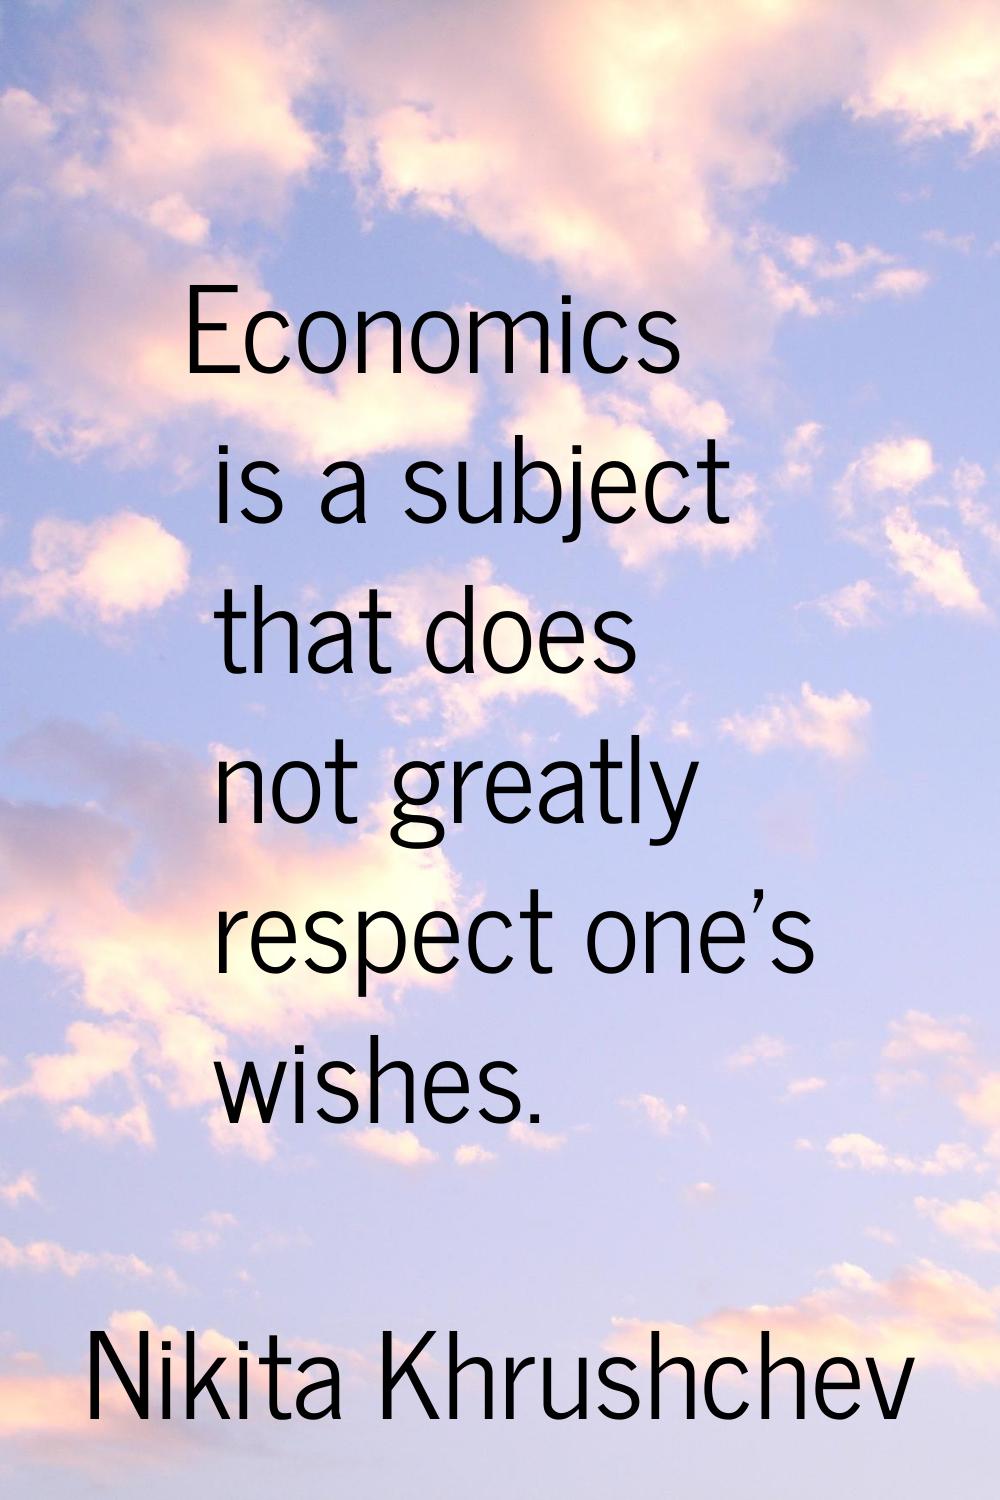 Economics is a subject that does not greatly respect one's wishes.